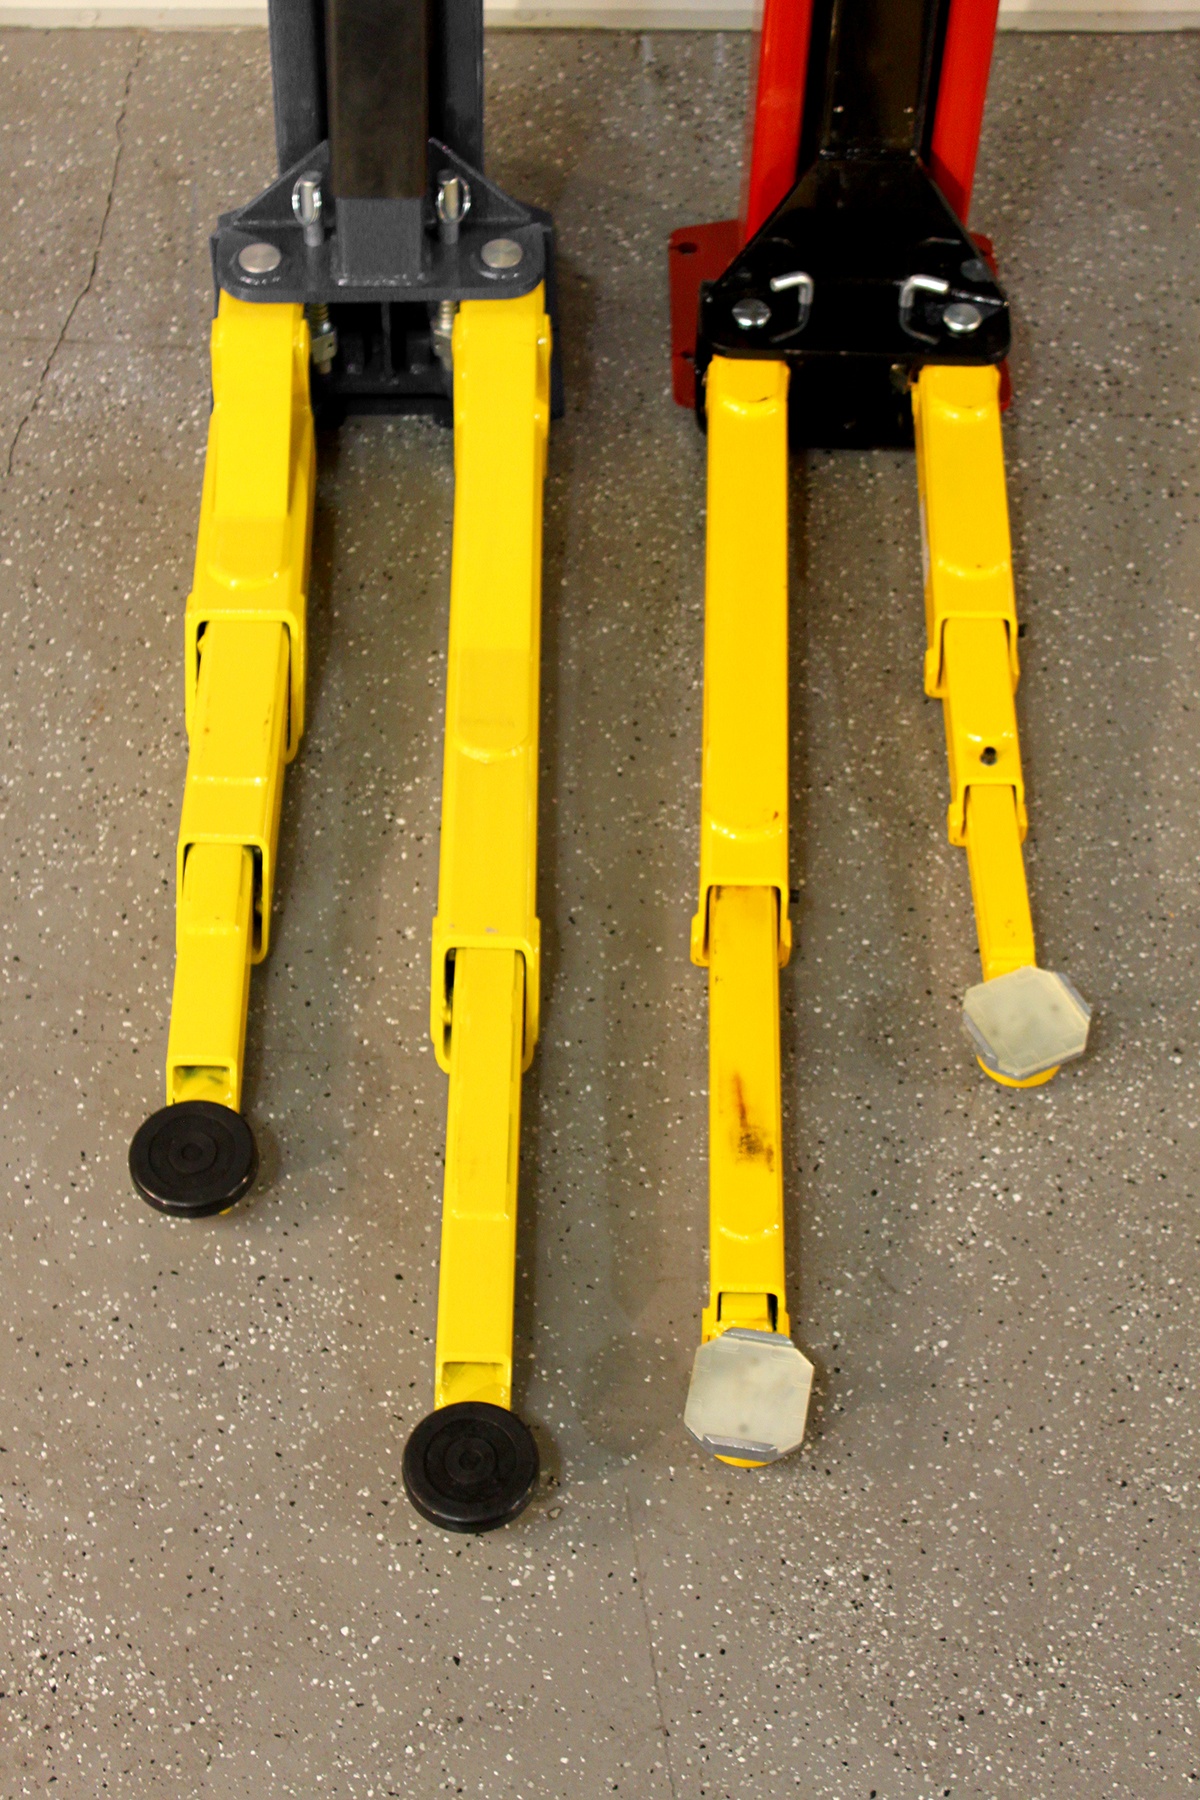 BendPak Two-Post Hoist Compared to Challenger Lift Arms Extended